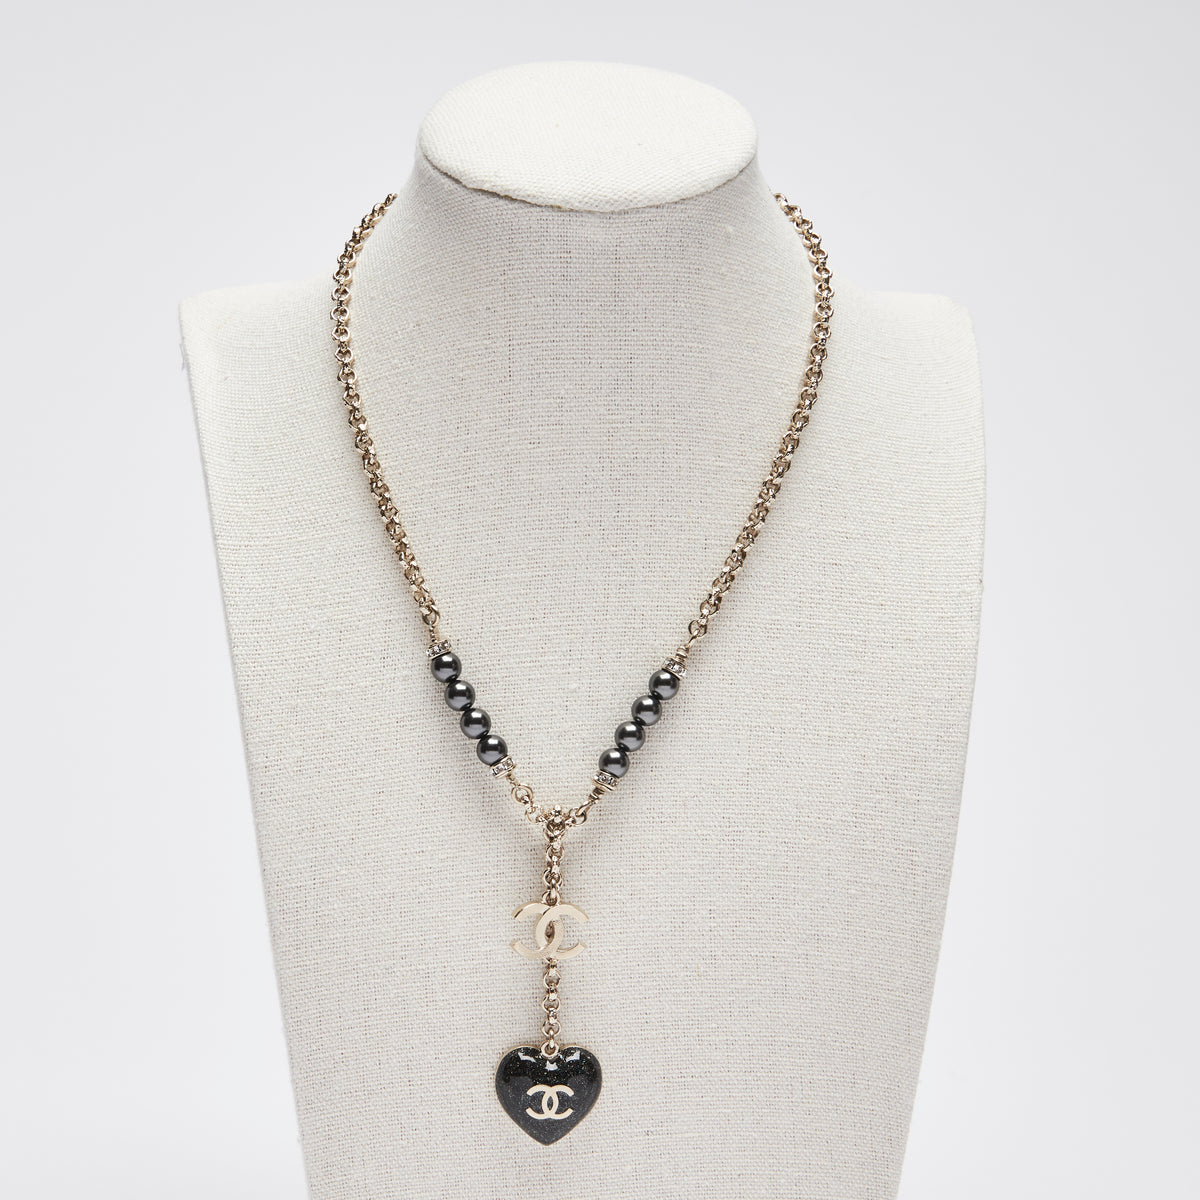 Chanel Black Glittered Enamel and Crystal Heart Pendant Necklace